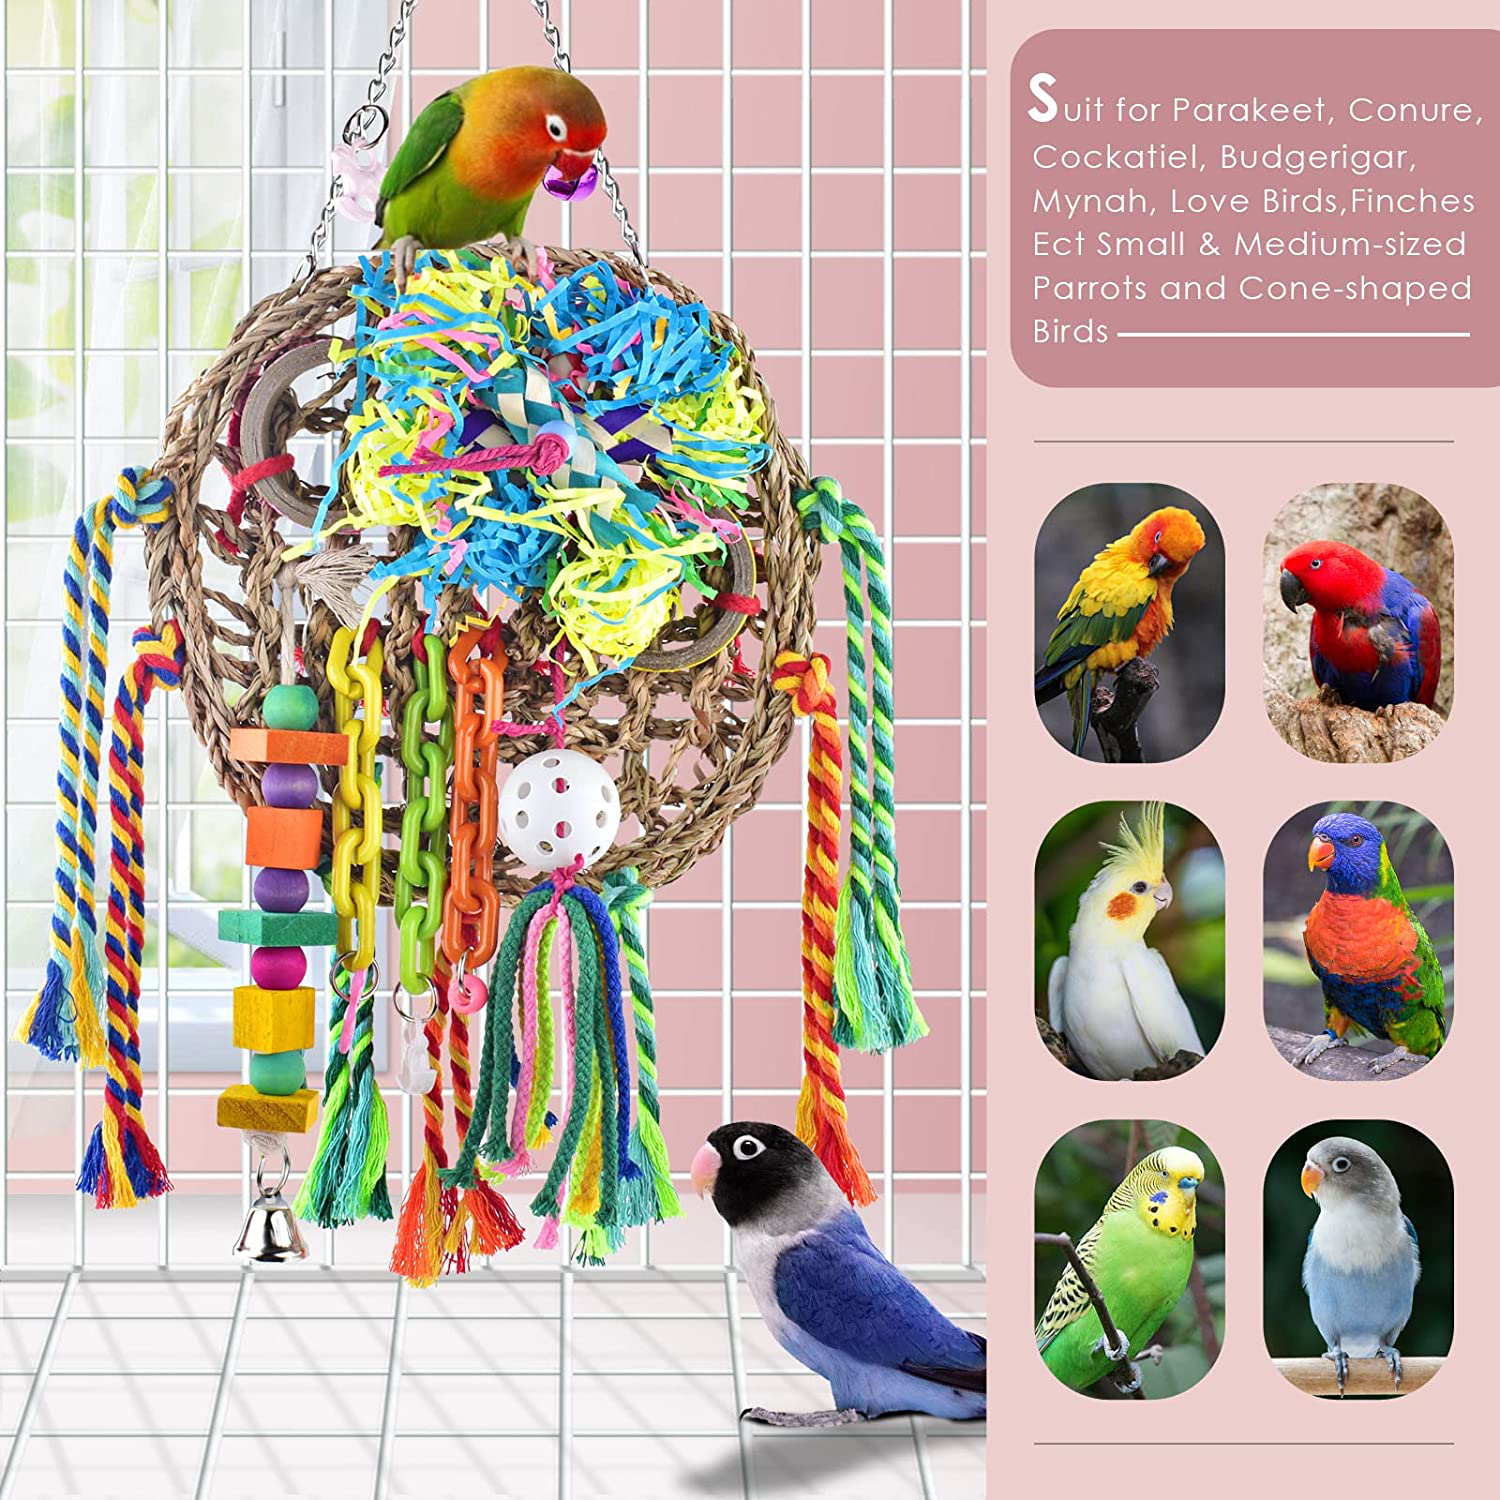 KATUMO Chewable Bird Toys, Bird Hanging Wall Toy Climbing Mat Parrot Hammock Bird Perch Swing Toy for Parakeets Budgerigars Conures Cockatiels Lovebirds, Small round Seagrass Mat Size 9.4'' X 9.4''